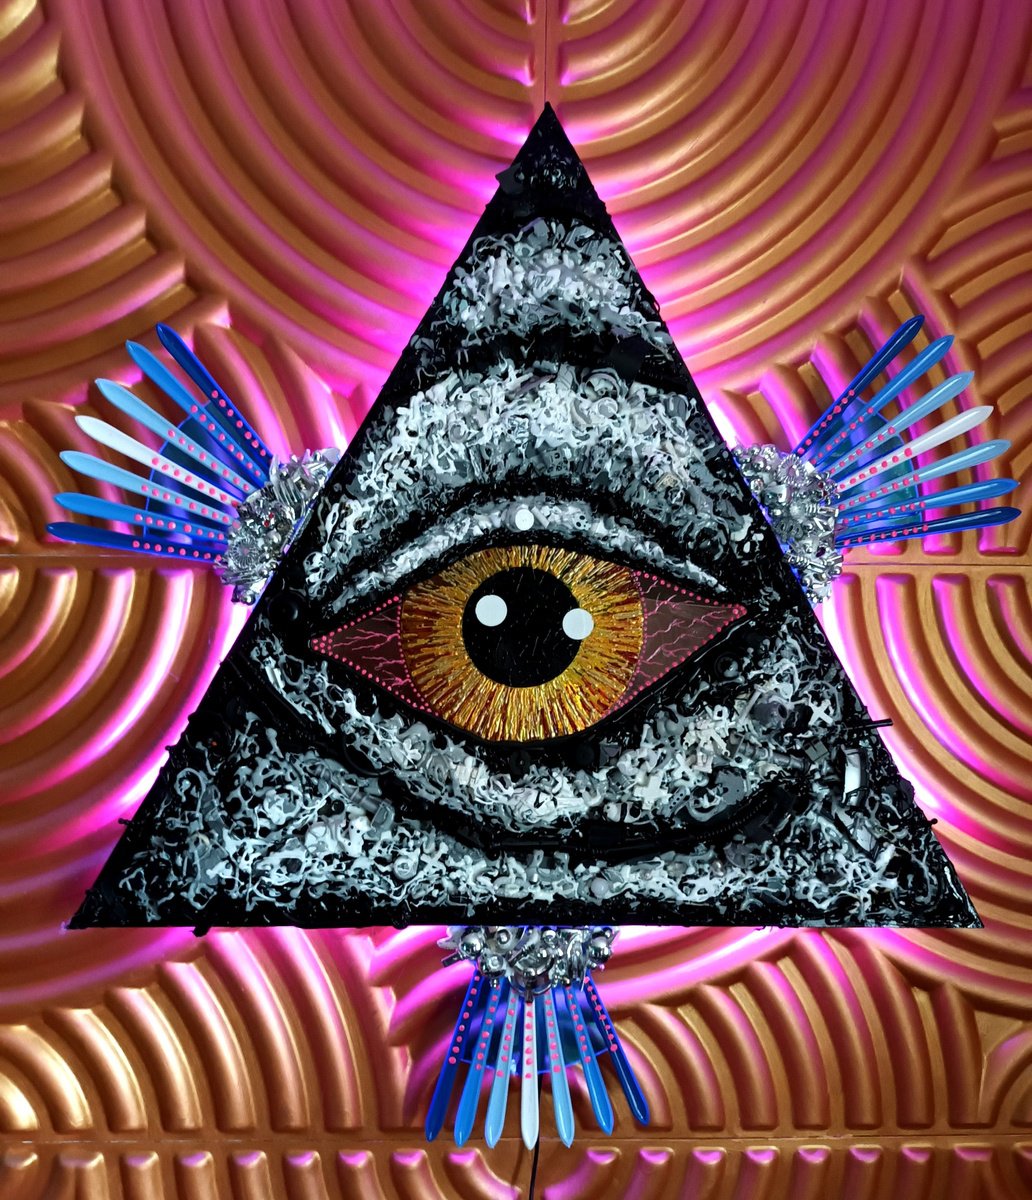 The Eye Of Providence by Karl G.o.P.